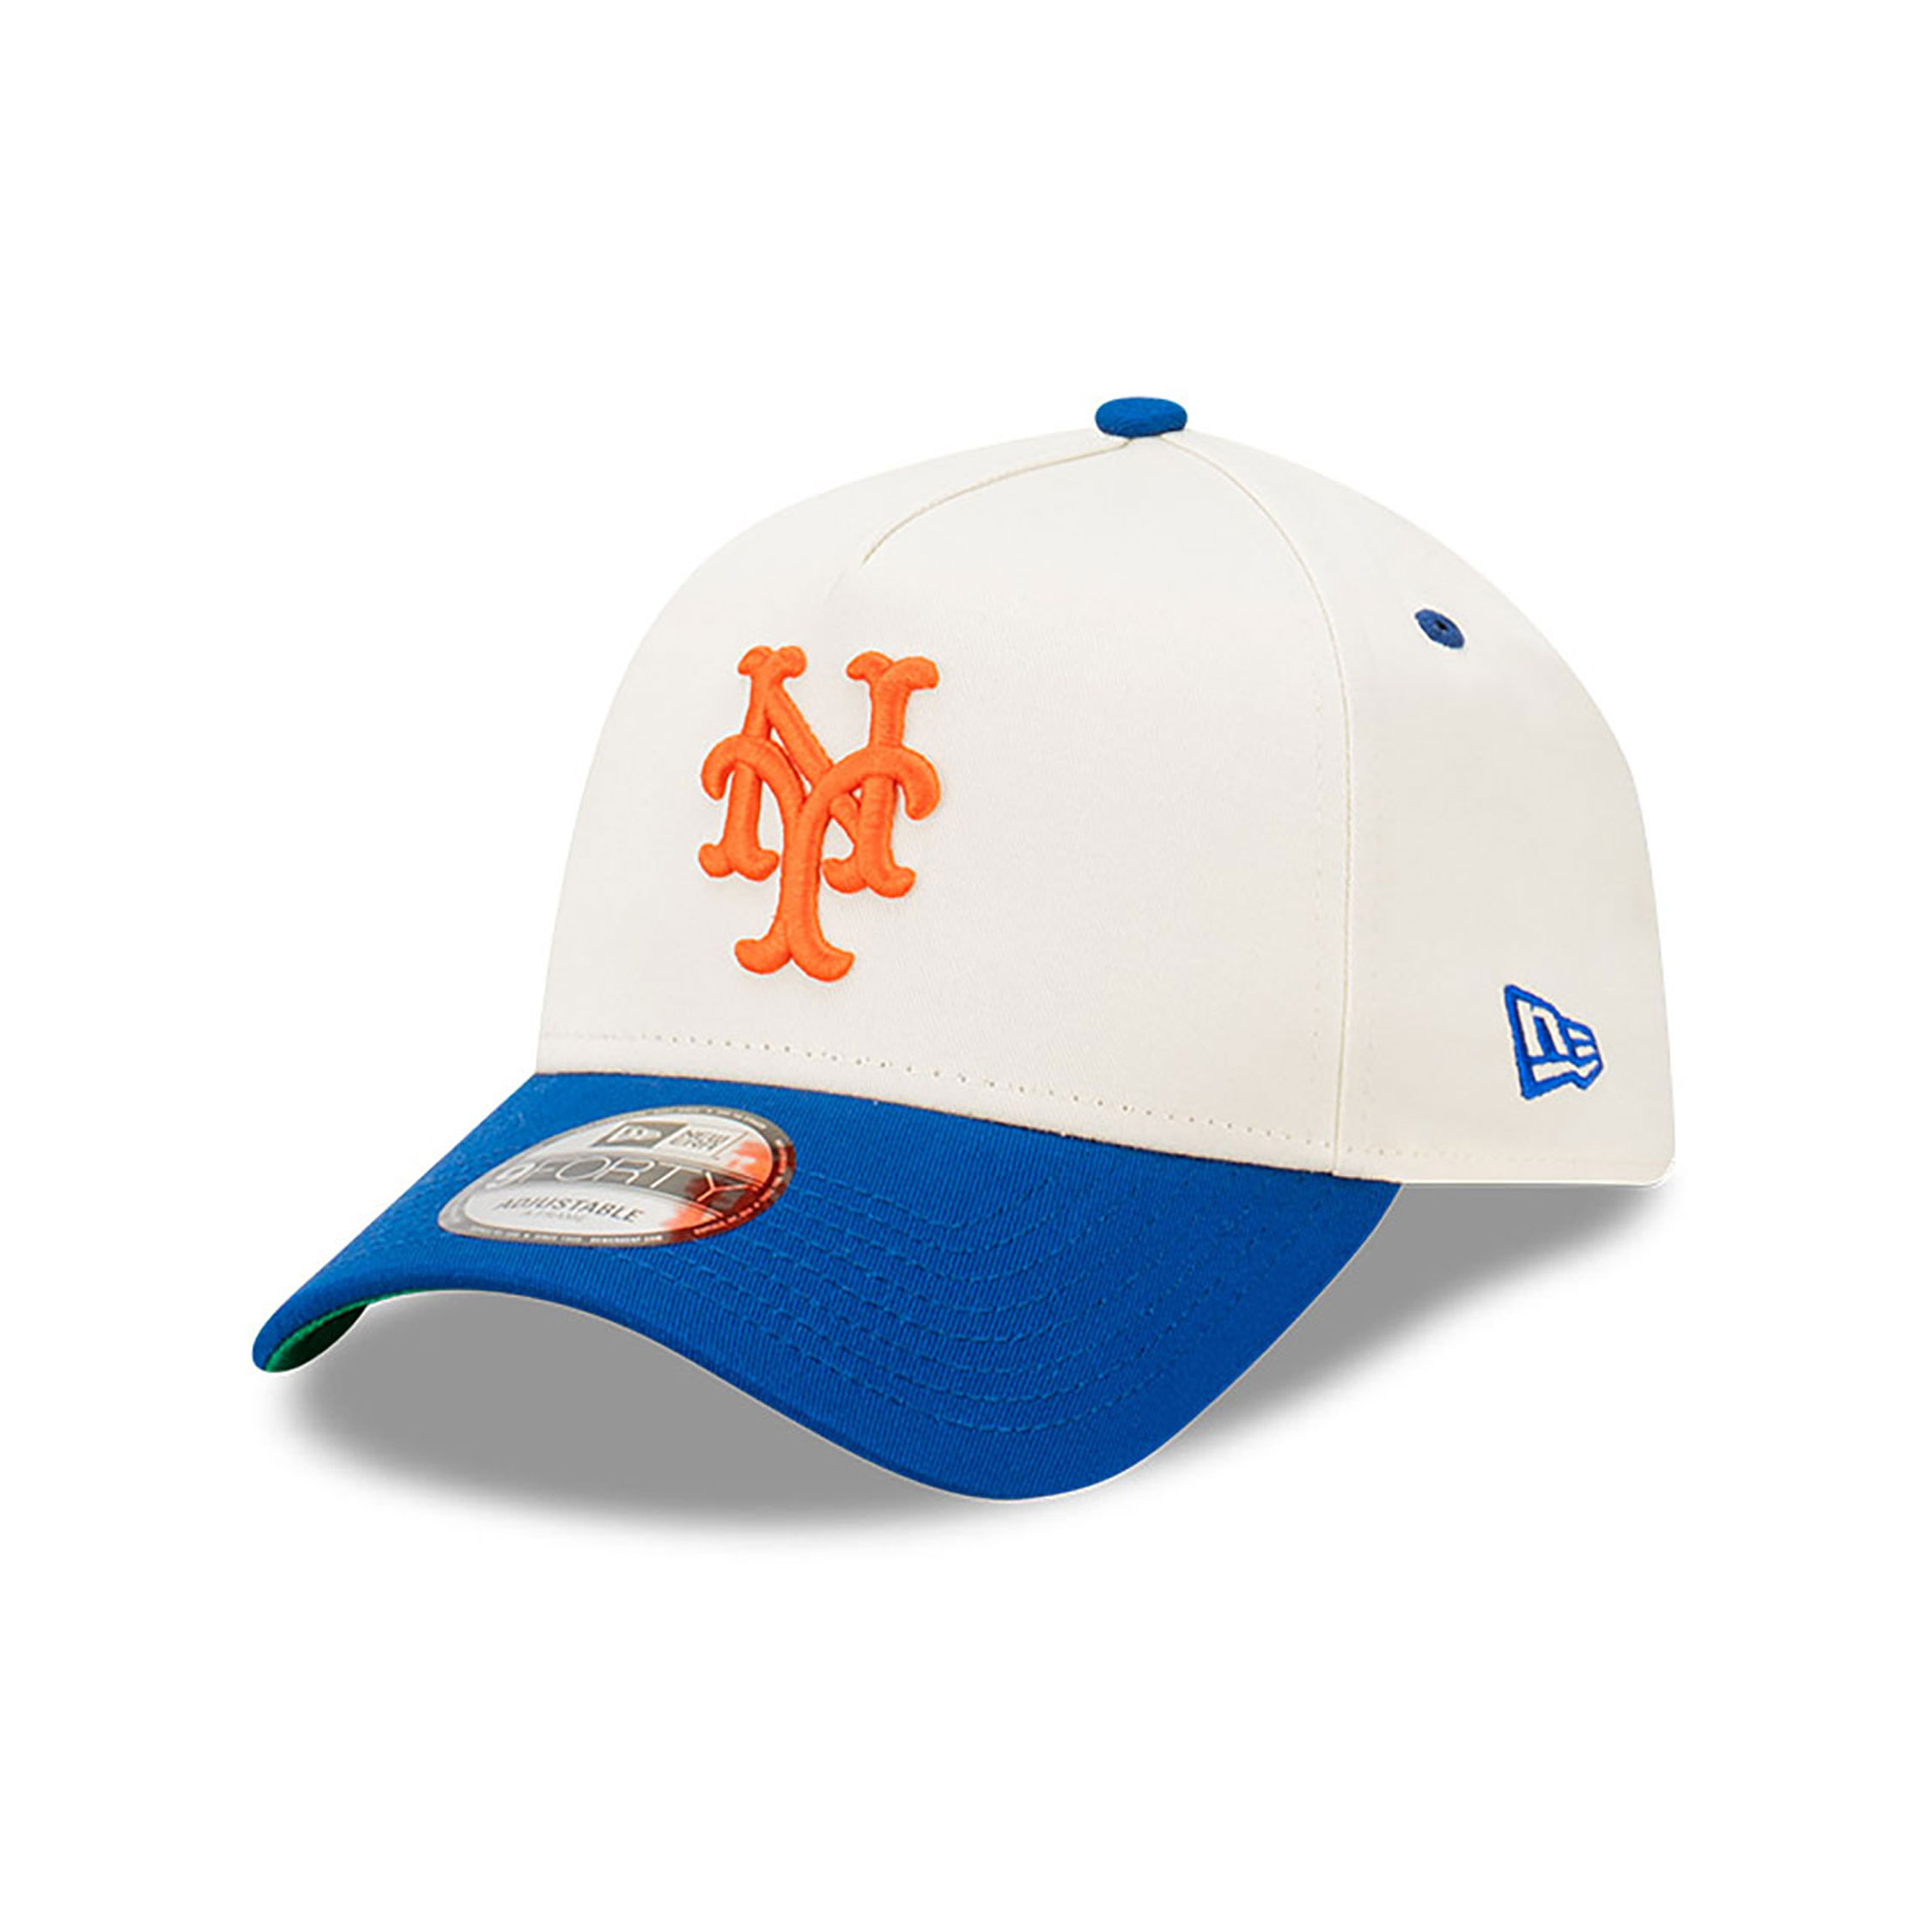 New York Mets All Star Game Vintage White 9FORTY A-Frame Adjustable Cap